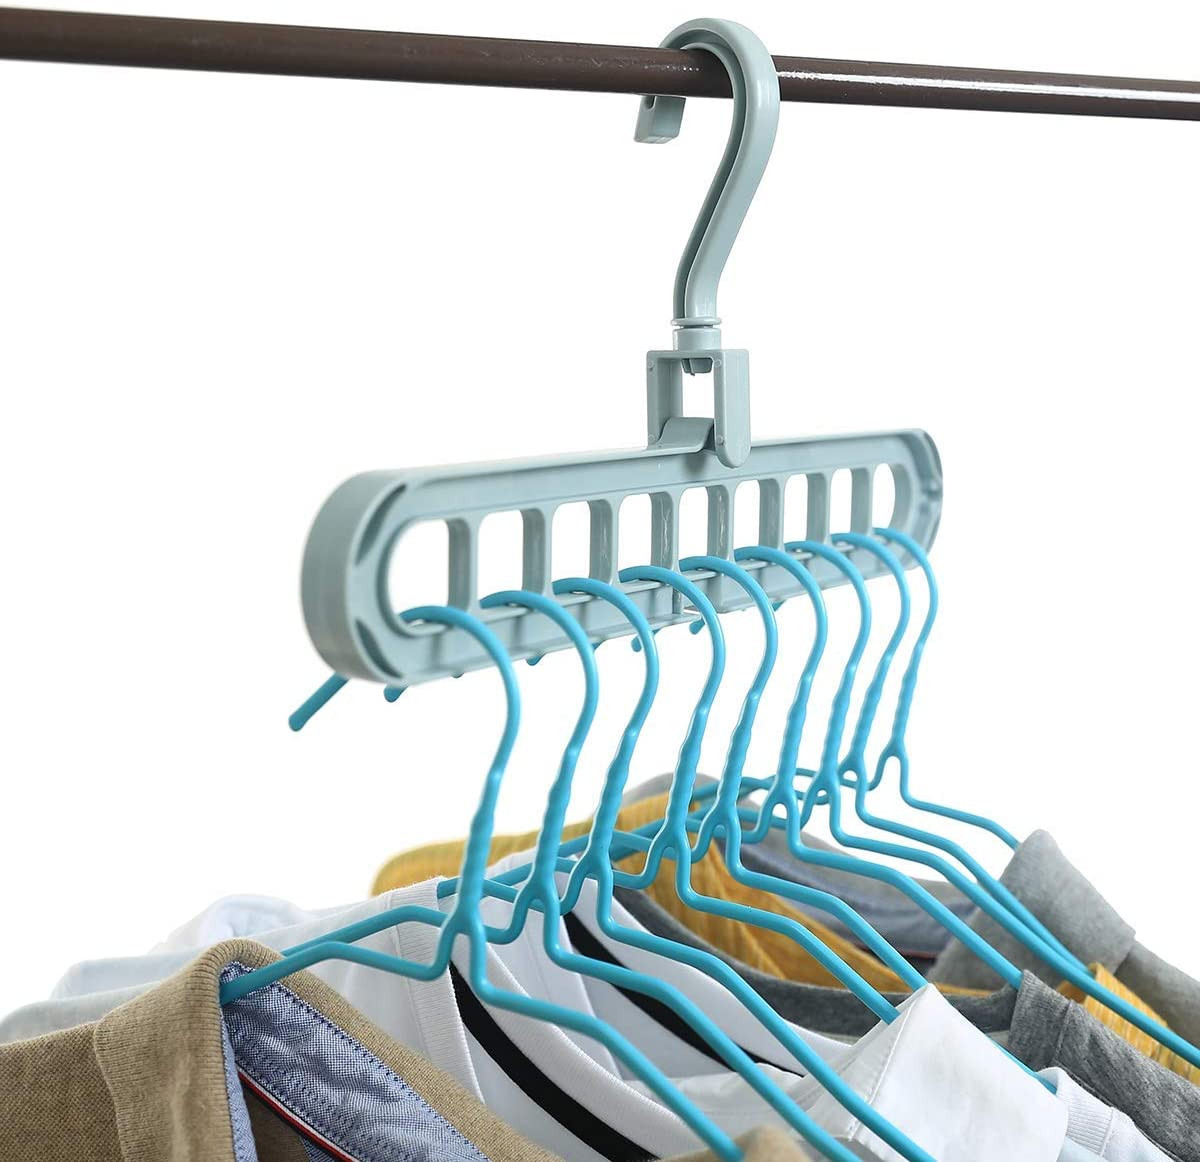 Kuber Industries Plastic Hangers for Adult Size Clothing, Plastic, Ideal for Everyday Standard Use Clothes, Shirts, Blouses, T-Shirts, Dresses, Jackets, Suits (Multi)